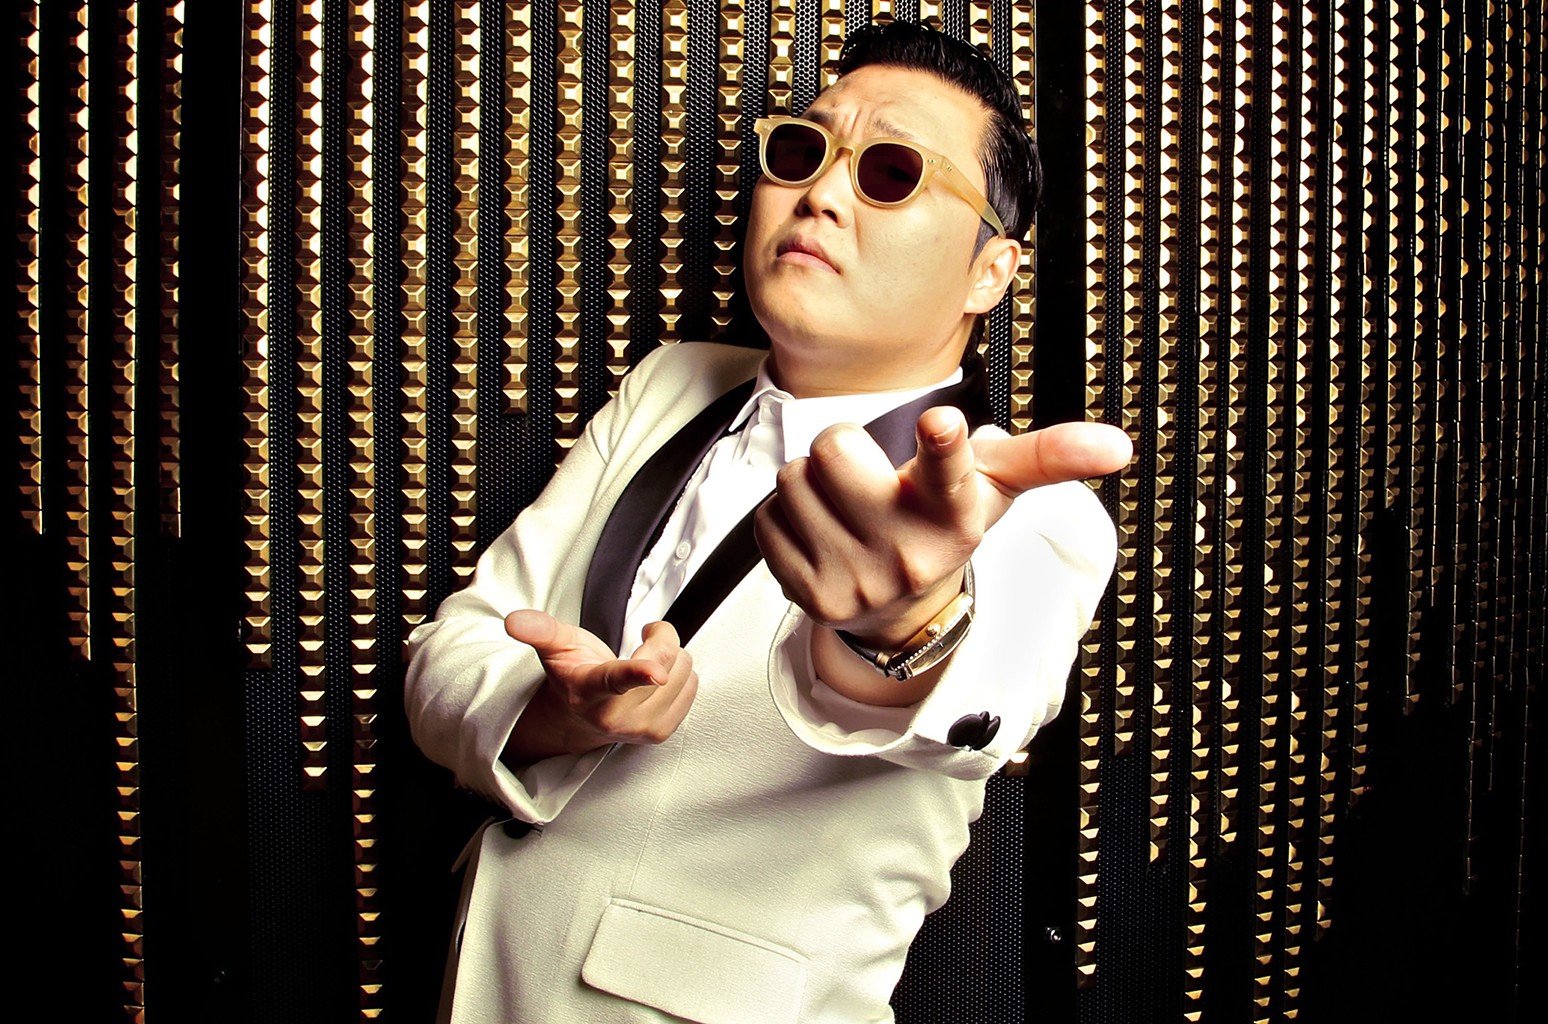 Gangnam Style star Psy was questioned on June 16, according to the Seoul Metropolitan Police Agency.